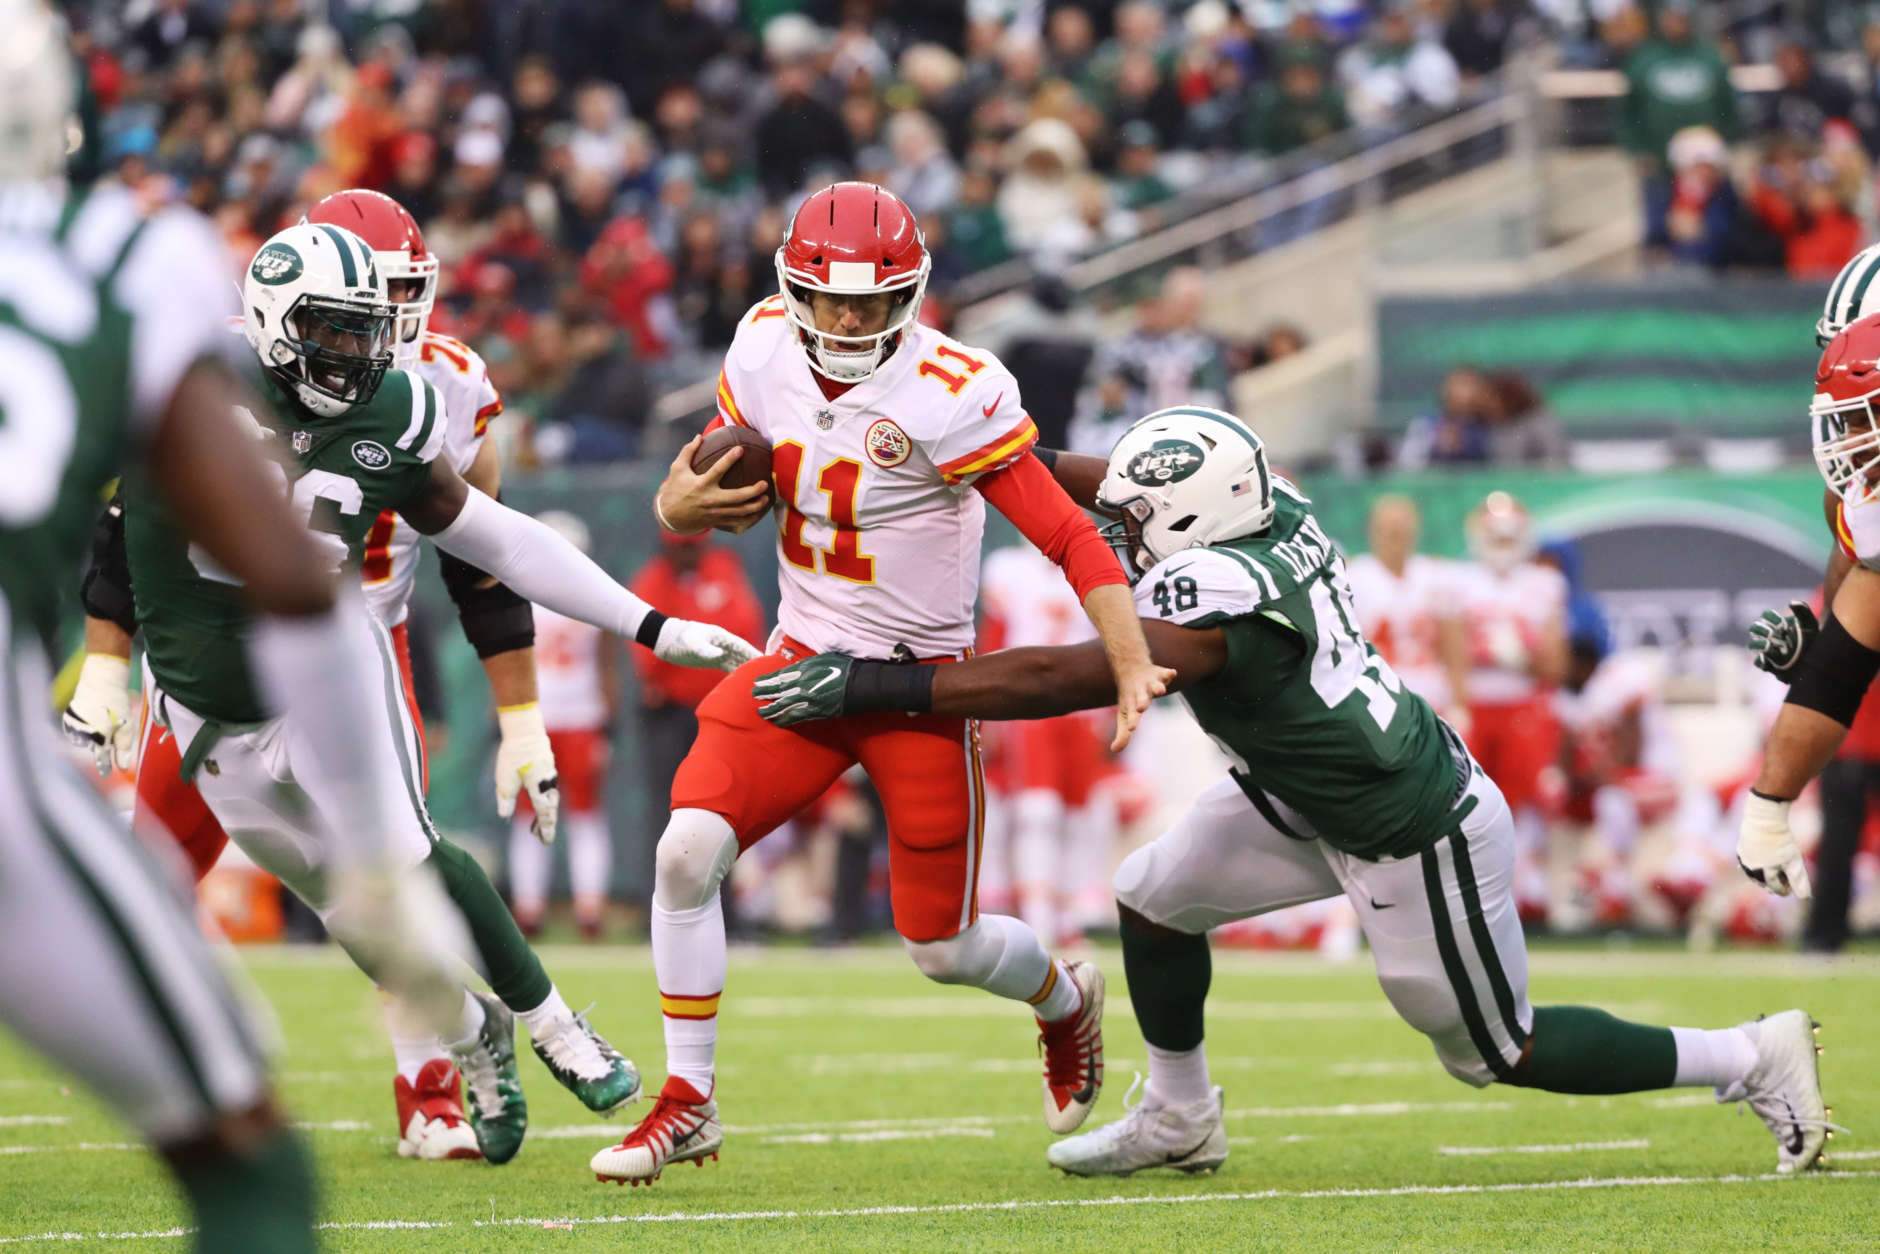 EAST RUTHERFORD, NJ - DECEMBER 03:  Alex Smith #11 of the Kansas City Chiefs makes a run against  Jordan Jenkins #48 of the New York Jets during their game at MetLife Stadium on December 3, 2017 in East Rutherford, New Jersey.  (Photo by Abbie Parr/Getty Images)